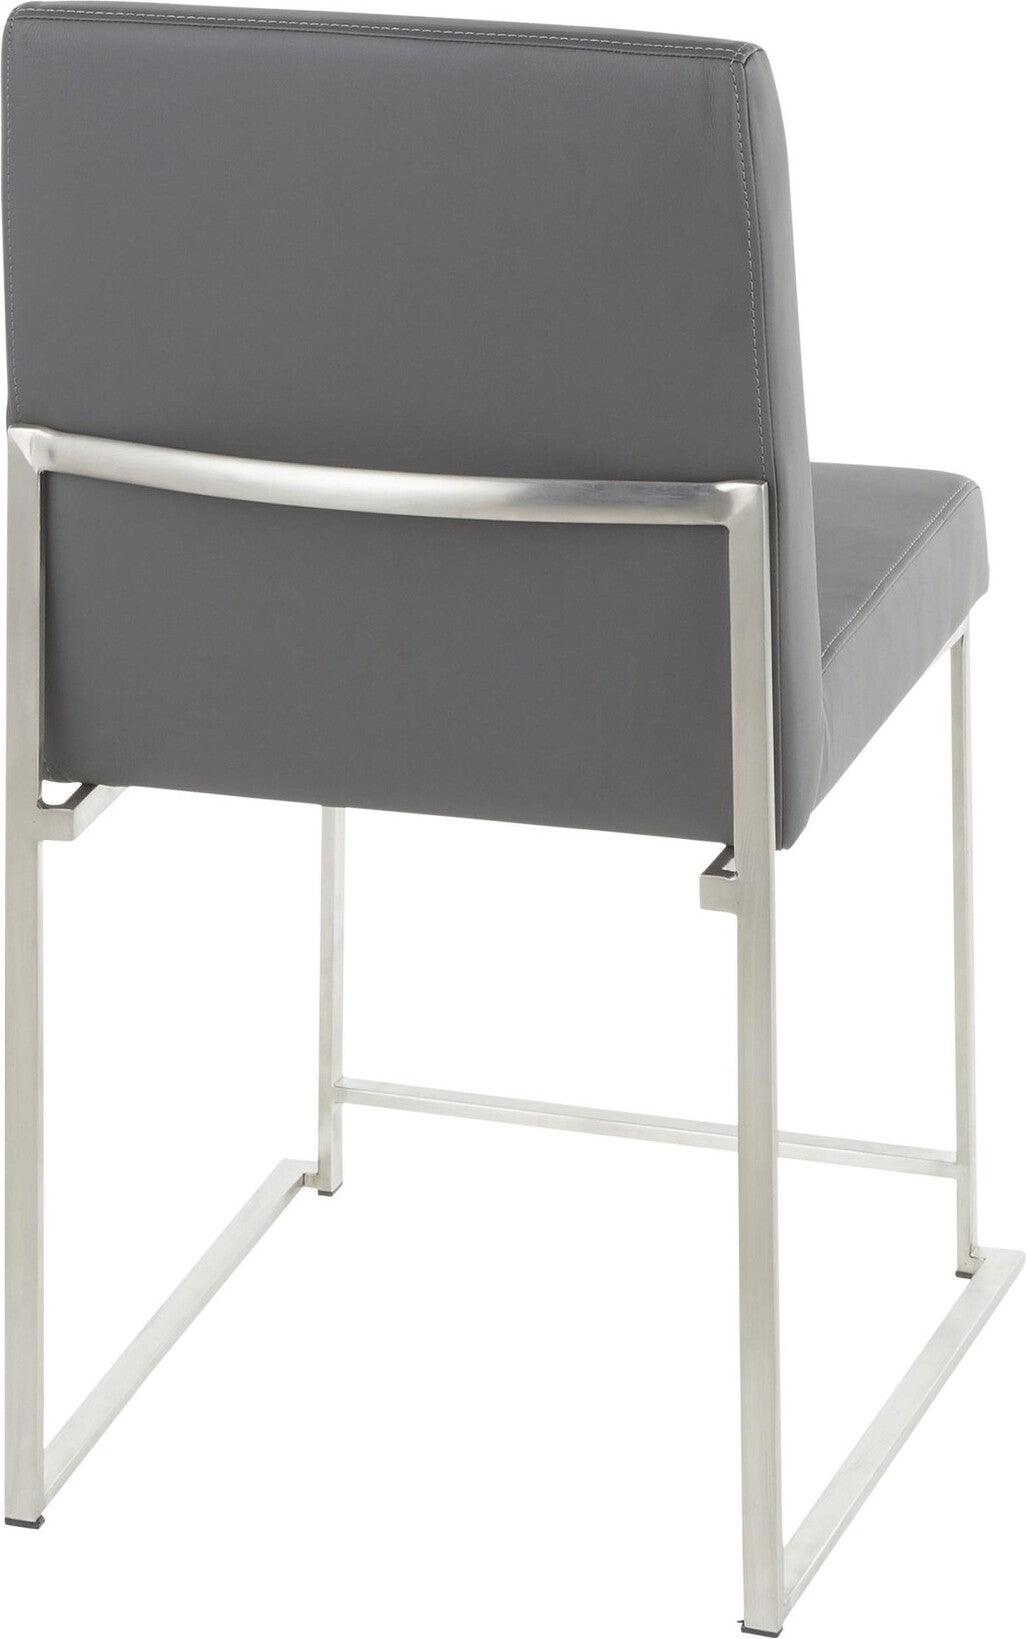 Lumisource Dining Chairs - High Back Fuji Contemporary Dining Chair in Stainless Steel and Grey Faux Leather (Set of 2)